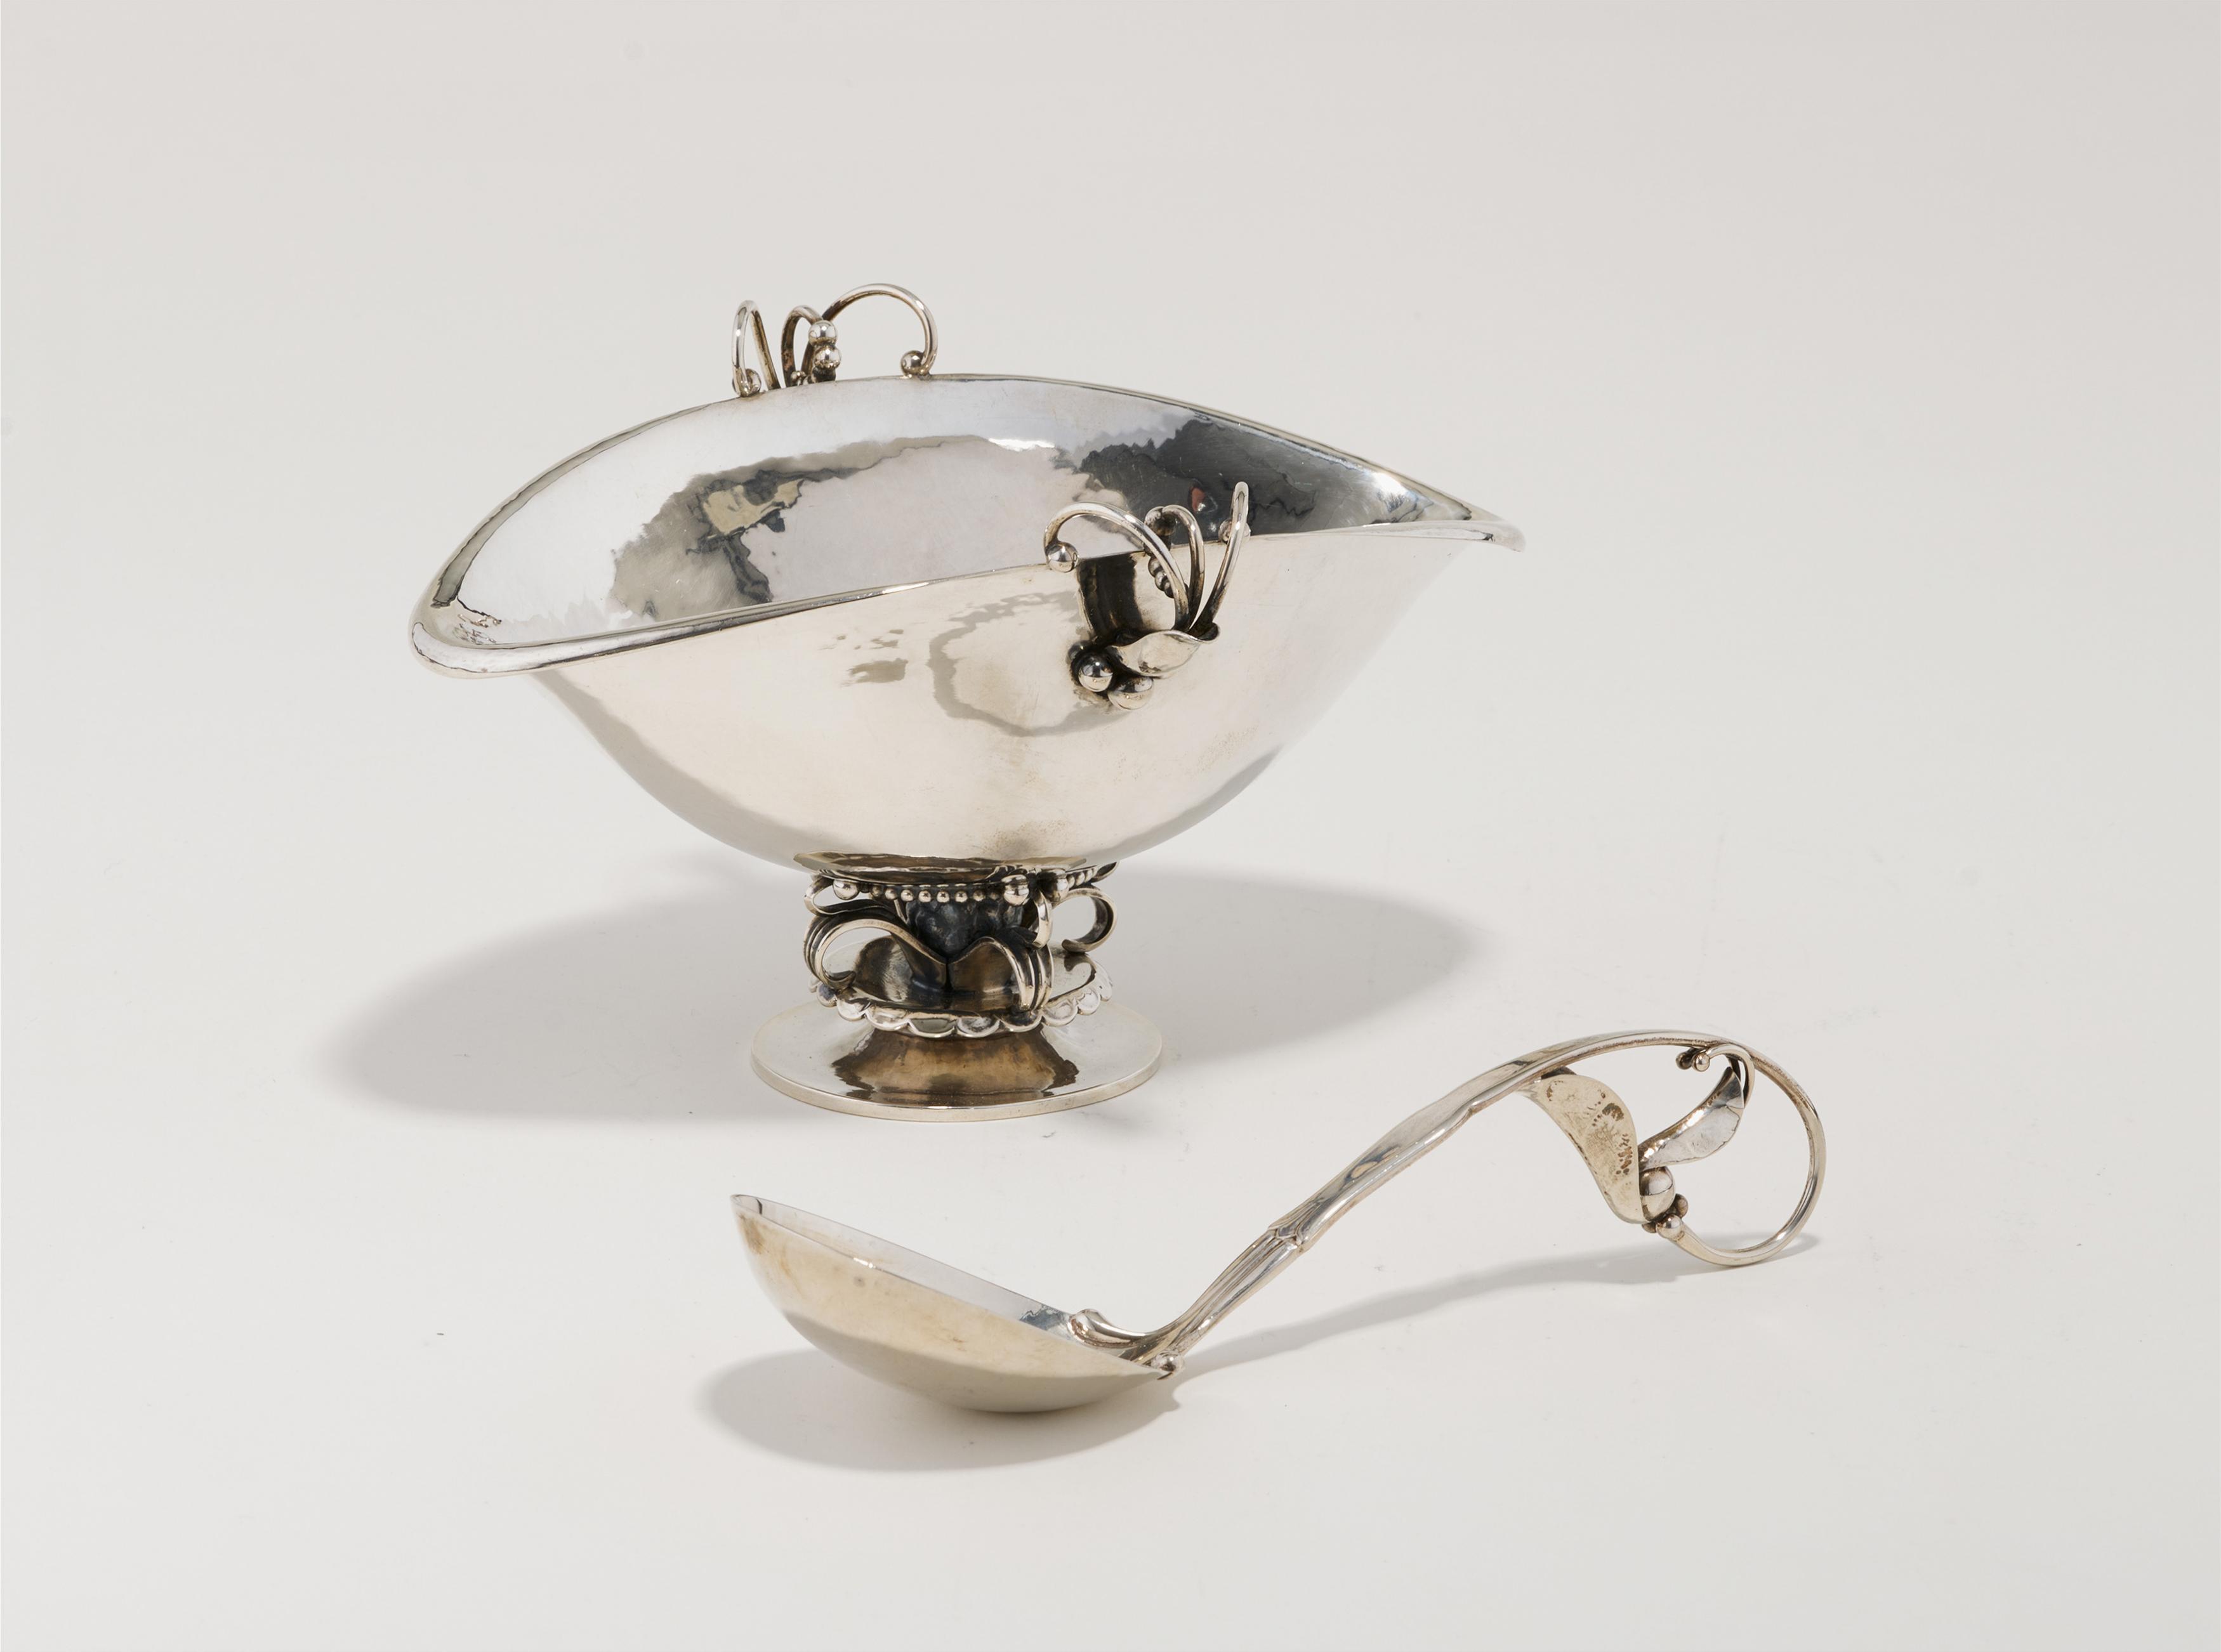 Silver gravy boat and sauce spoon - Image 4 of 9